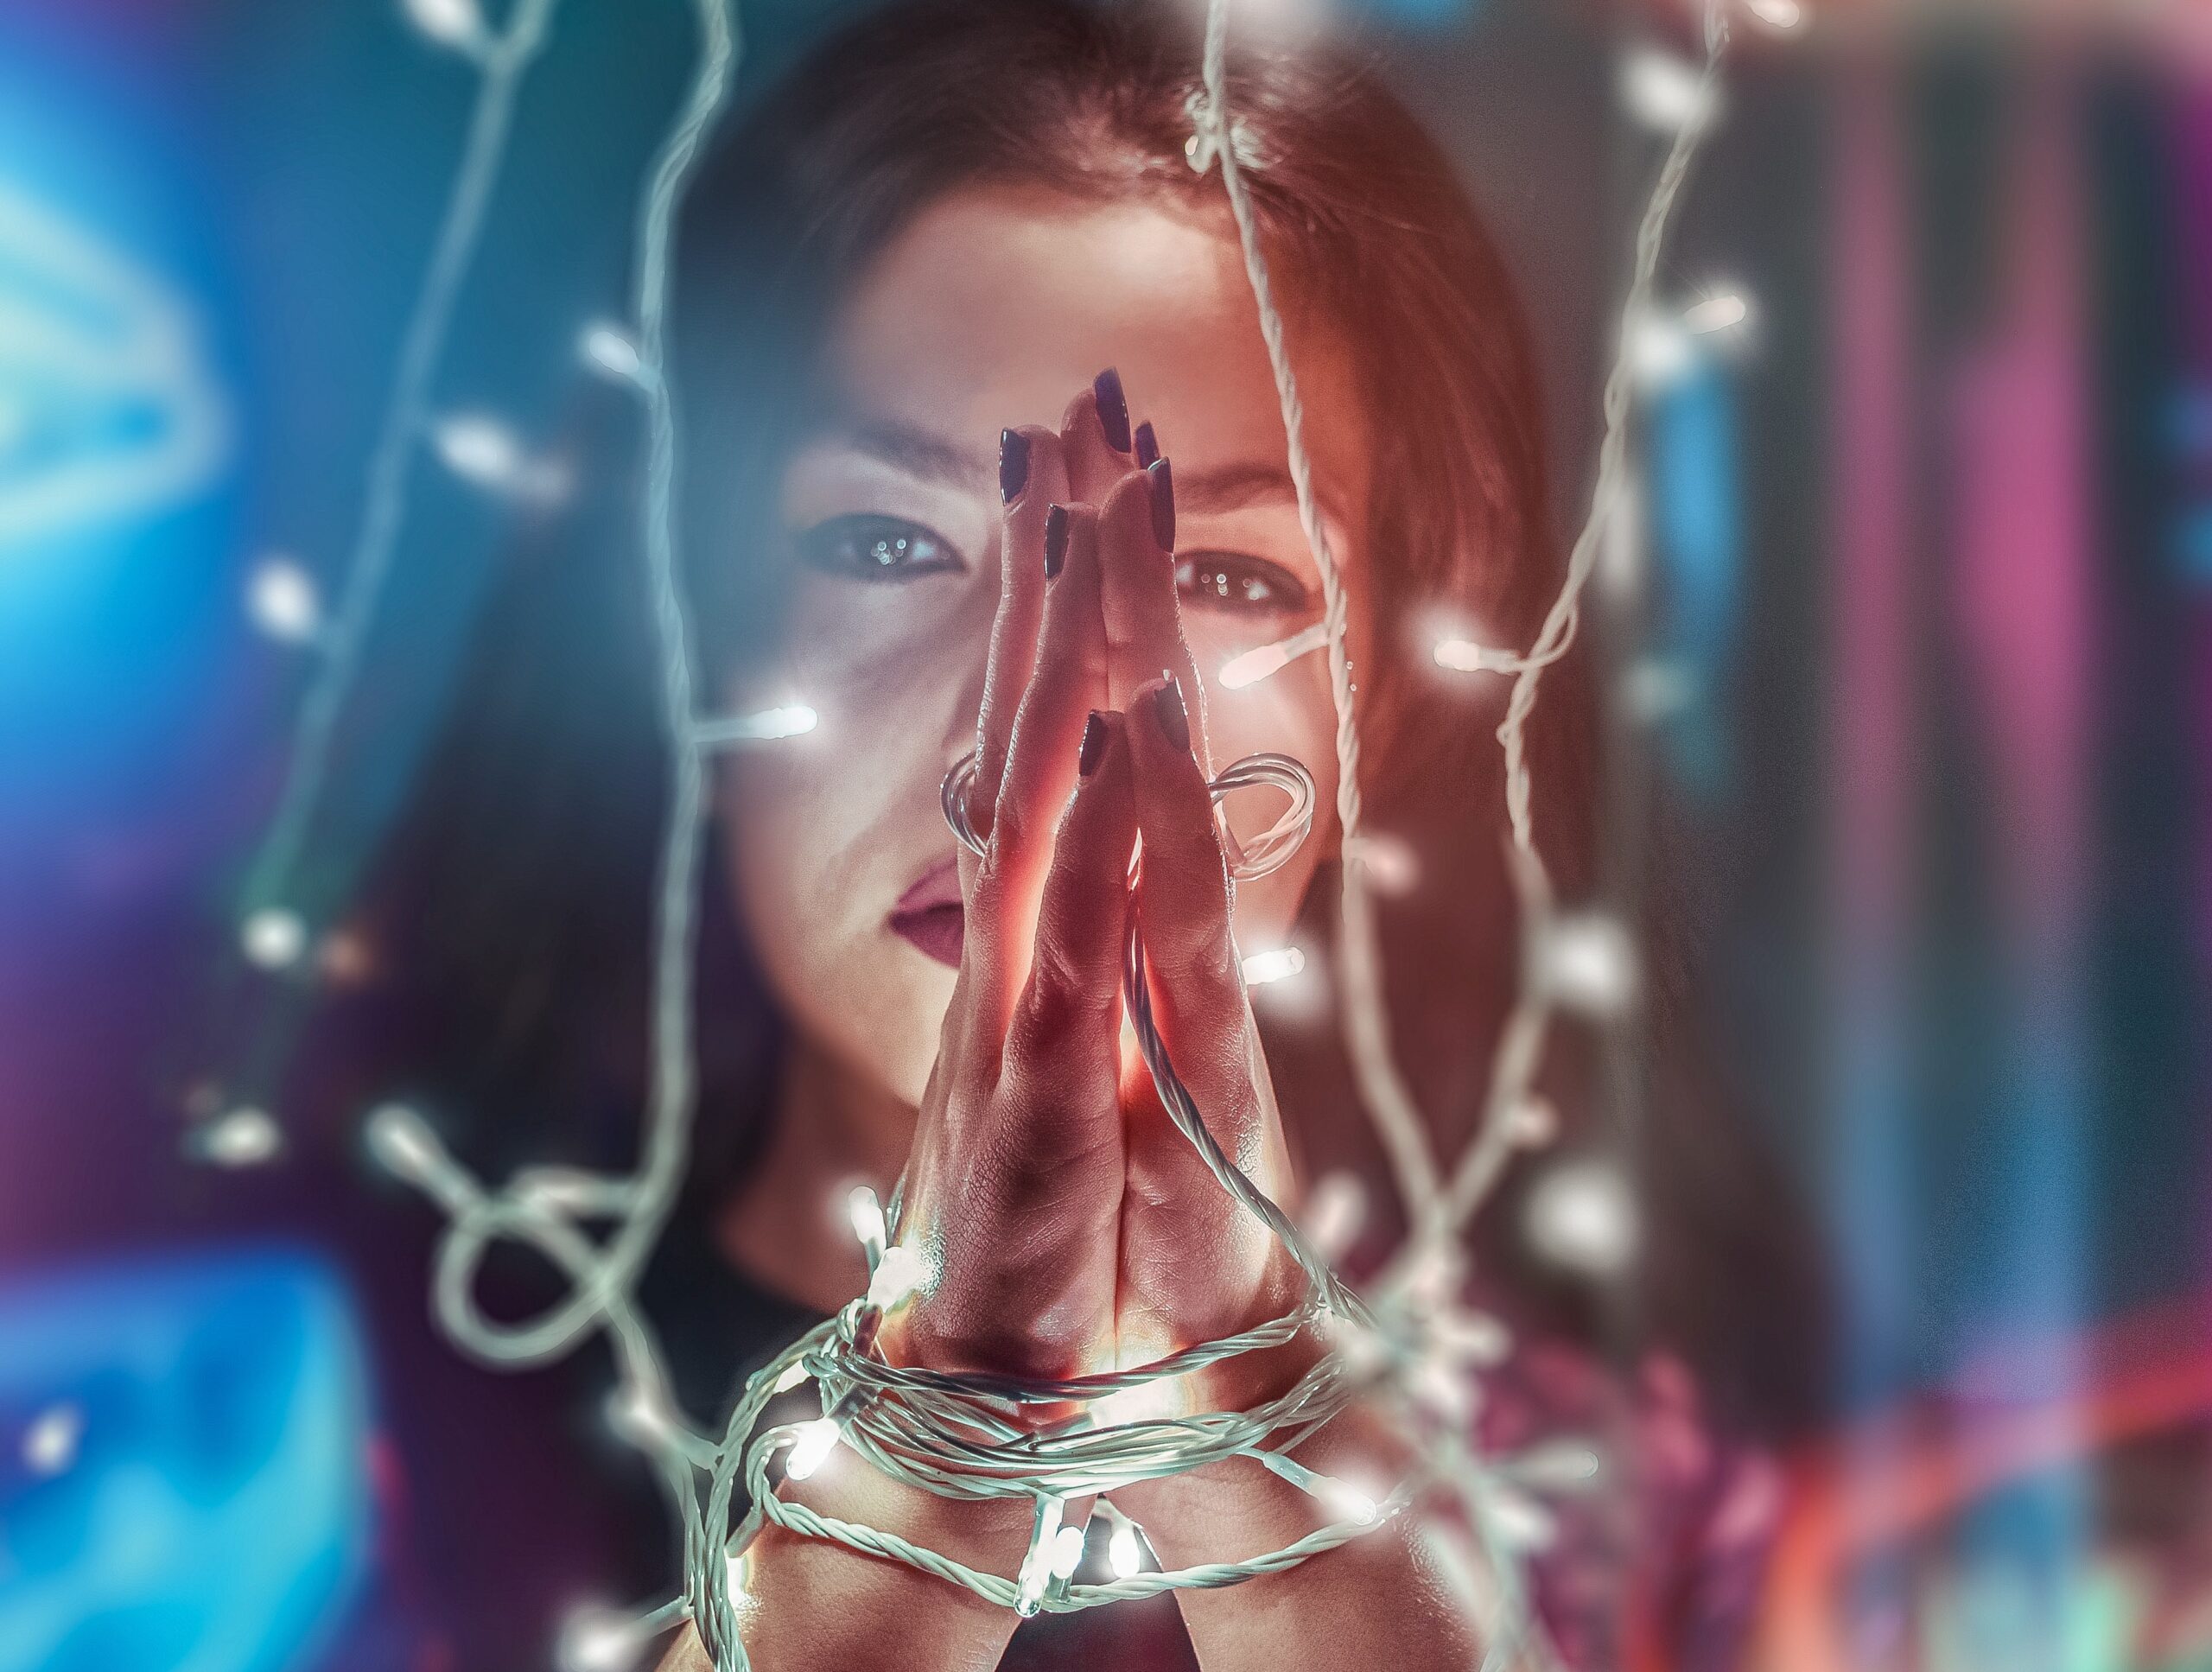 a-woman-practices-spiritual-bdsm-by-tying-her-hands-with-string-lights